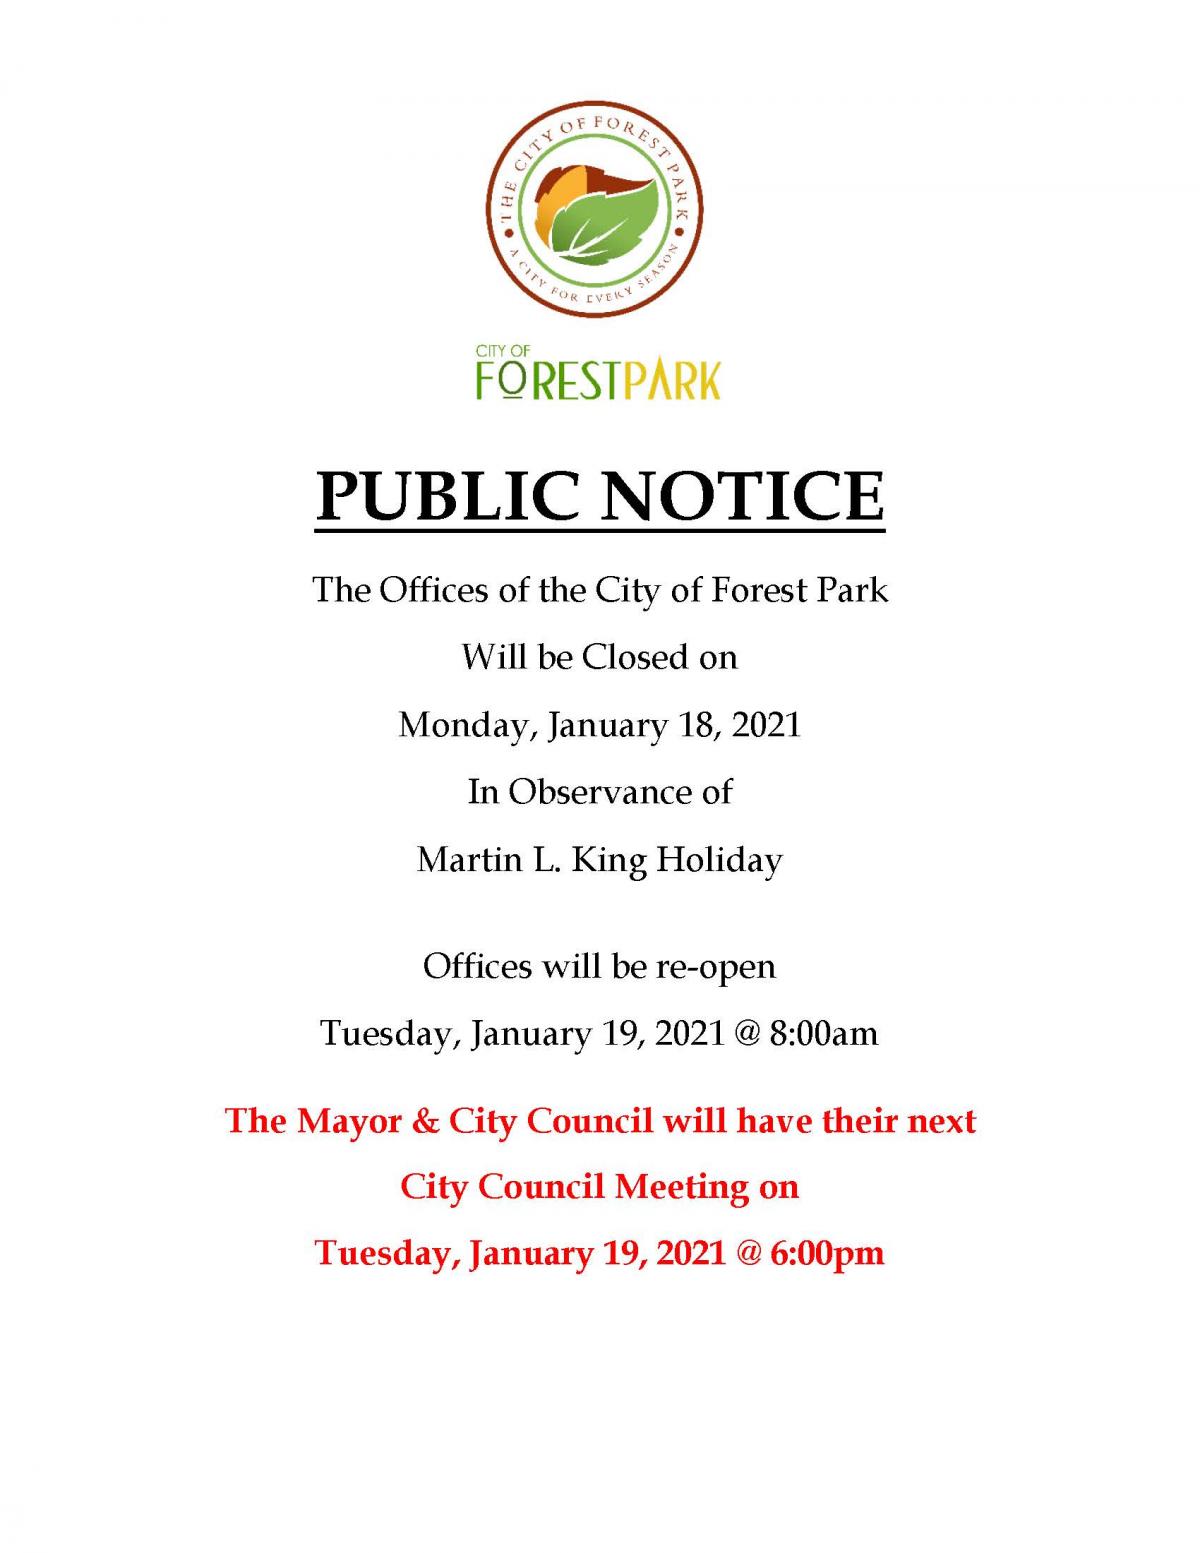 The Offices of the City of Forest Park Will be Closed on Monday, January 18, 2021 In Observance of Martin L. King Holiday